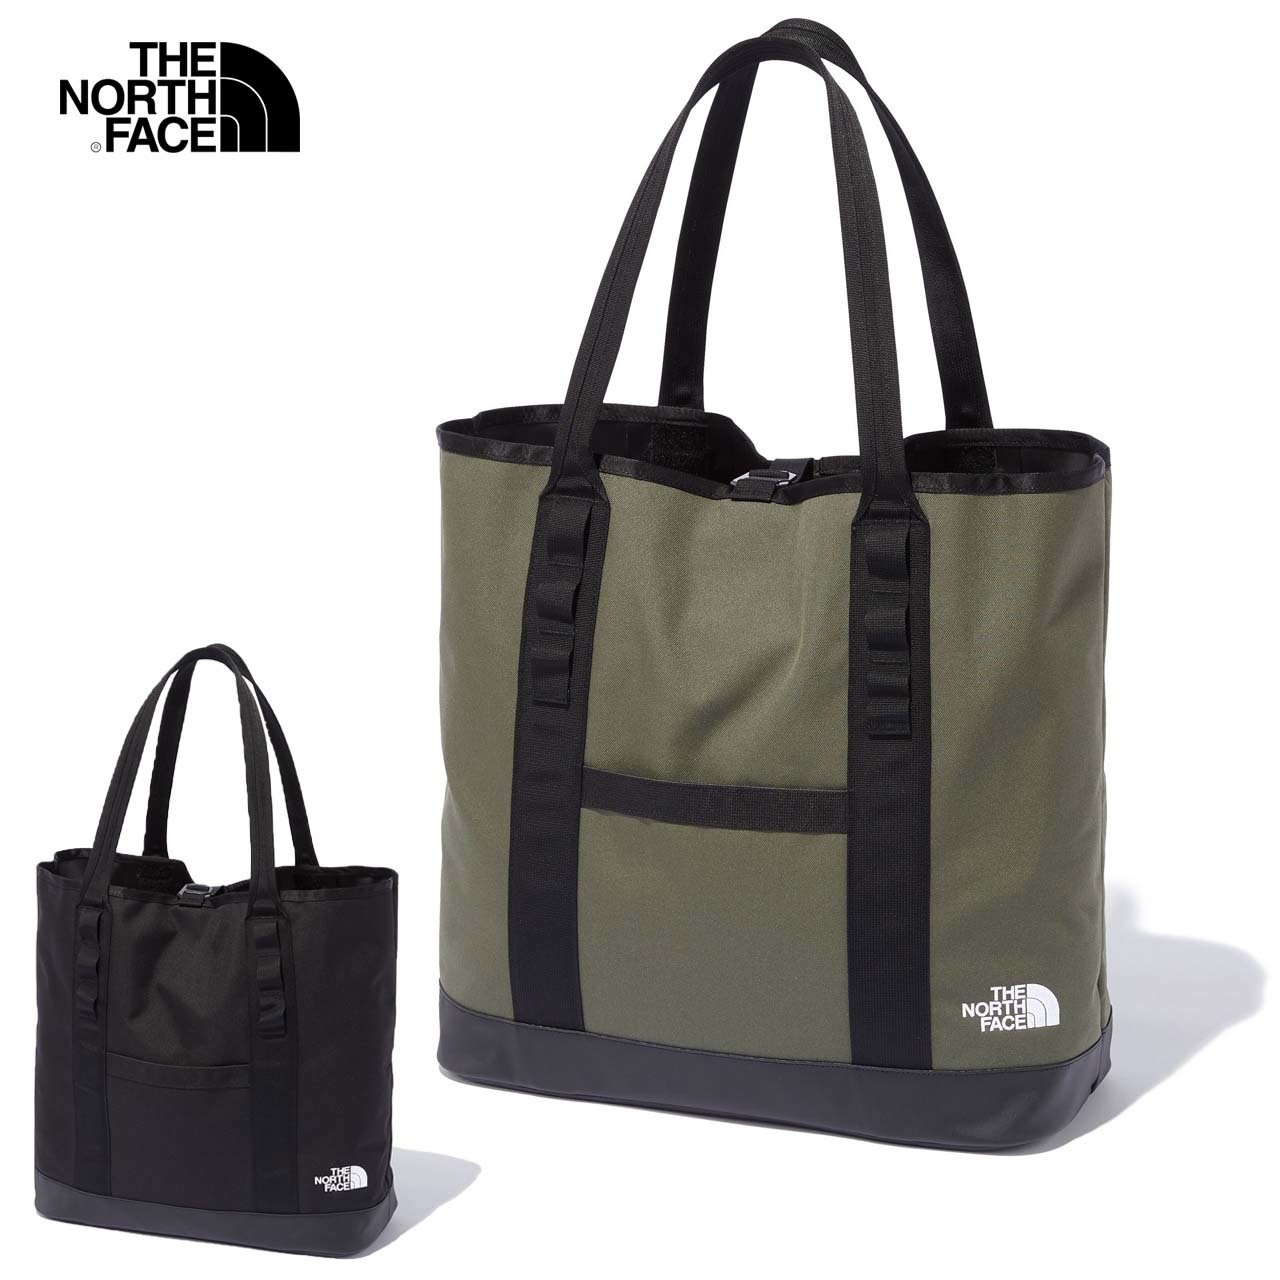 THE NORTH FACE [ザ・ノース・フェイス] Fieludens Gear Tote S [NM82202]_f0051306_09274971.jpg